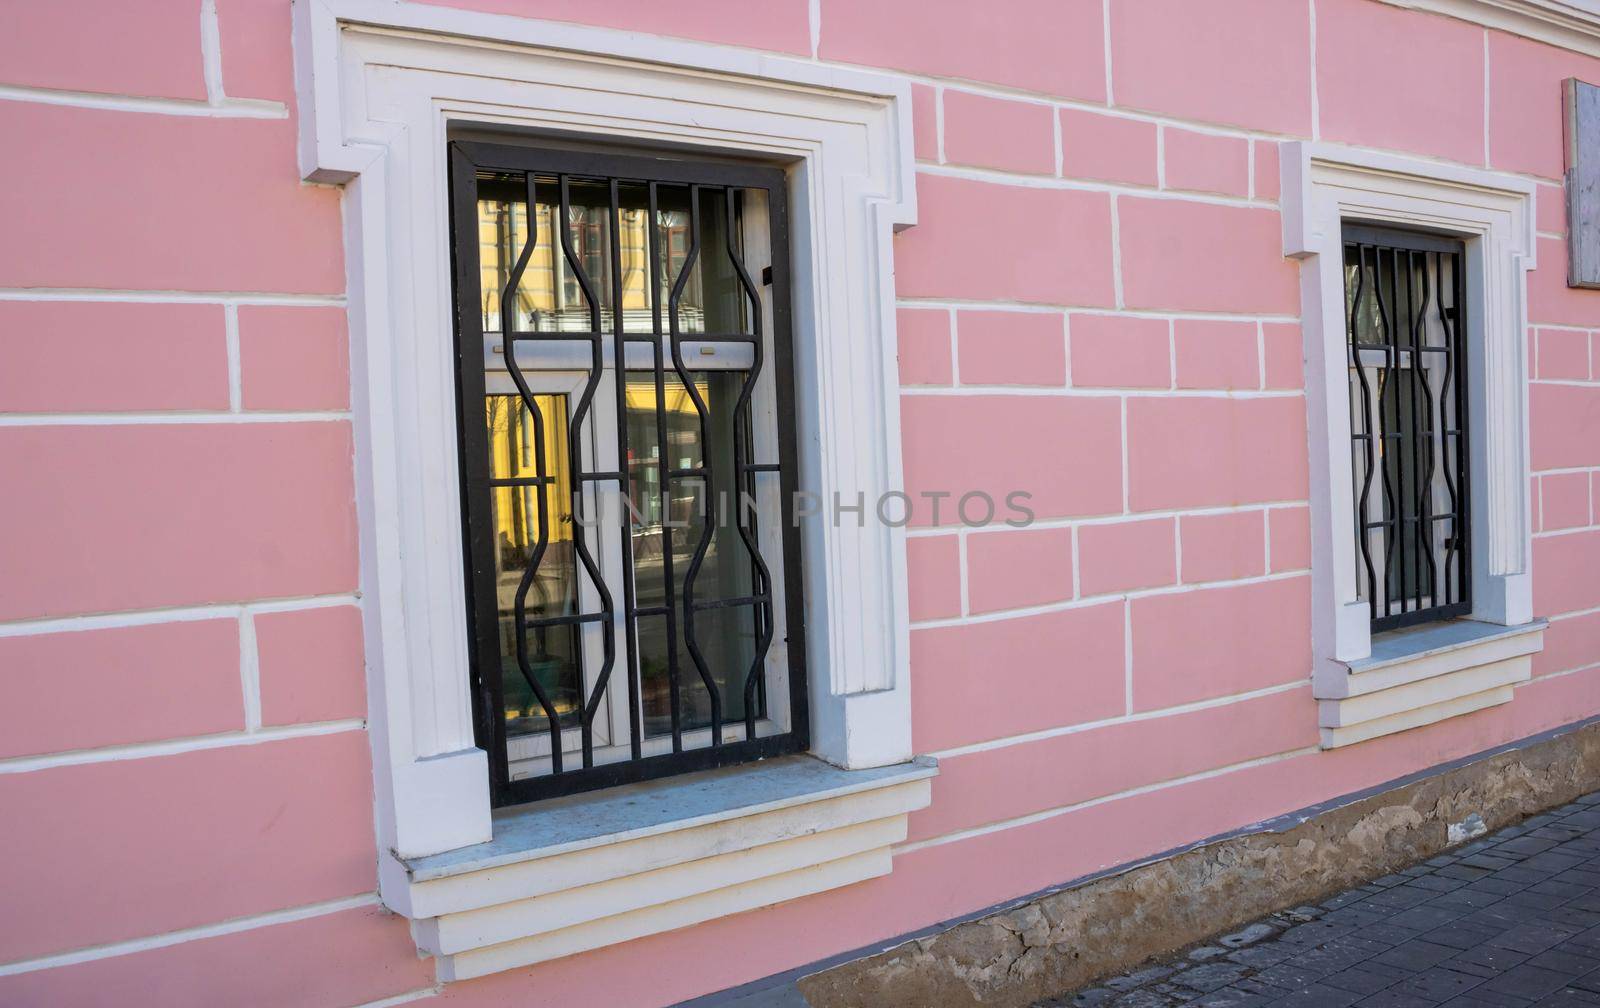 Side view of the pink facade with white windows and bars.